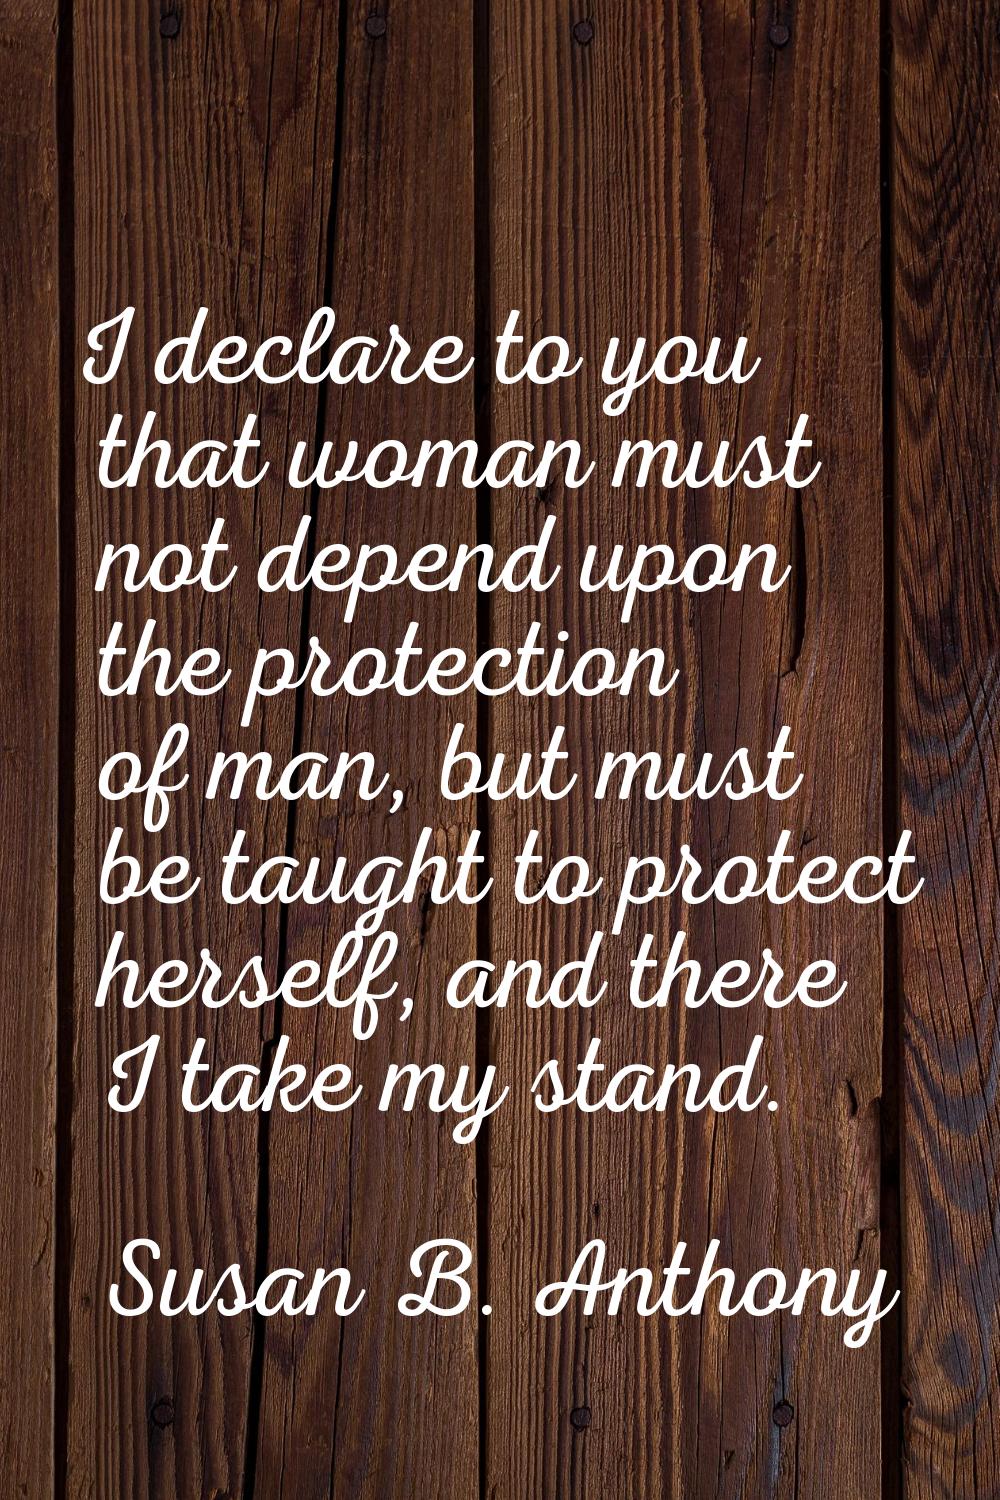 I declare to you that woman must not depend upon the protection of man, but must be taught to prote